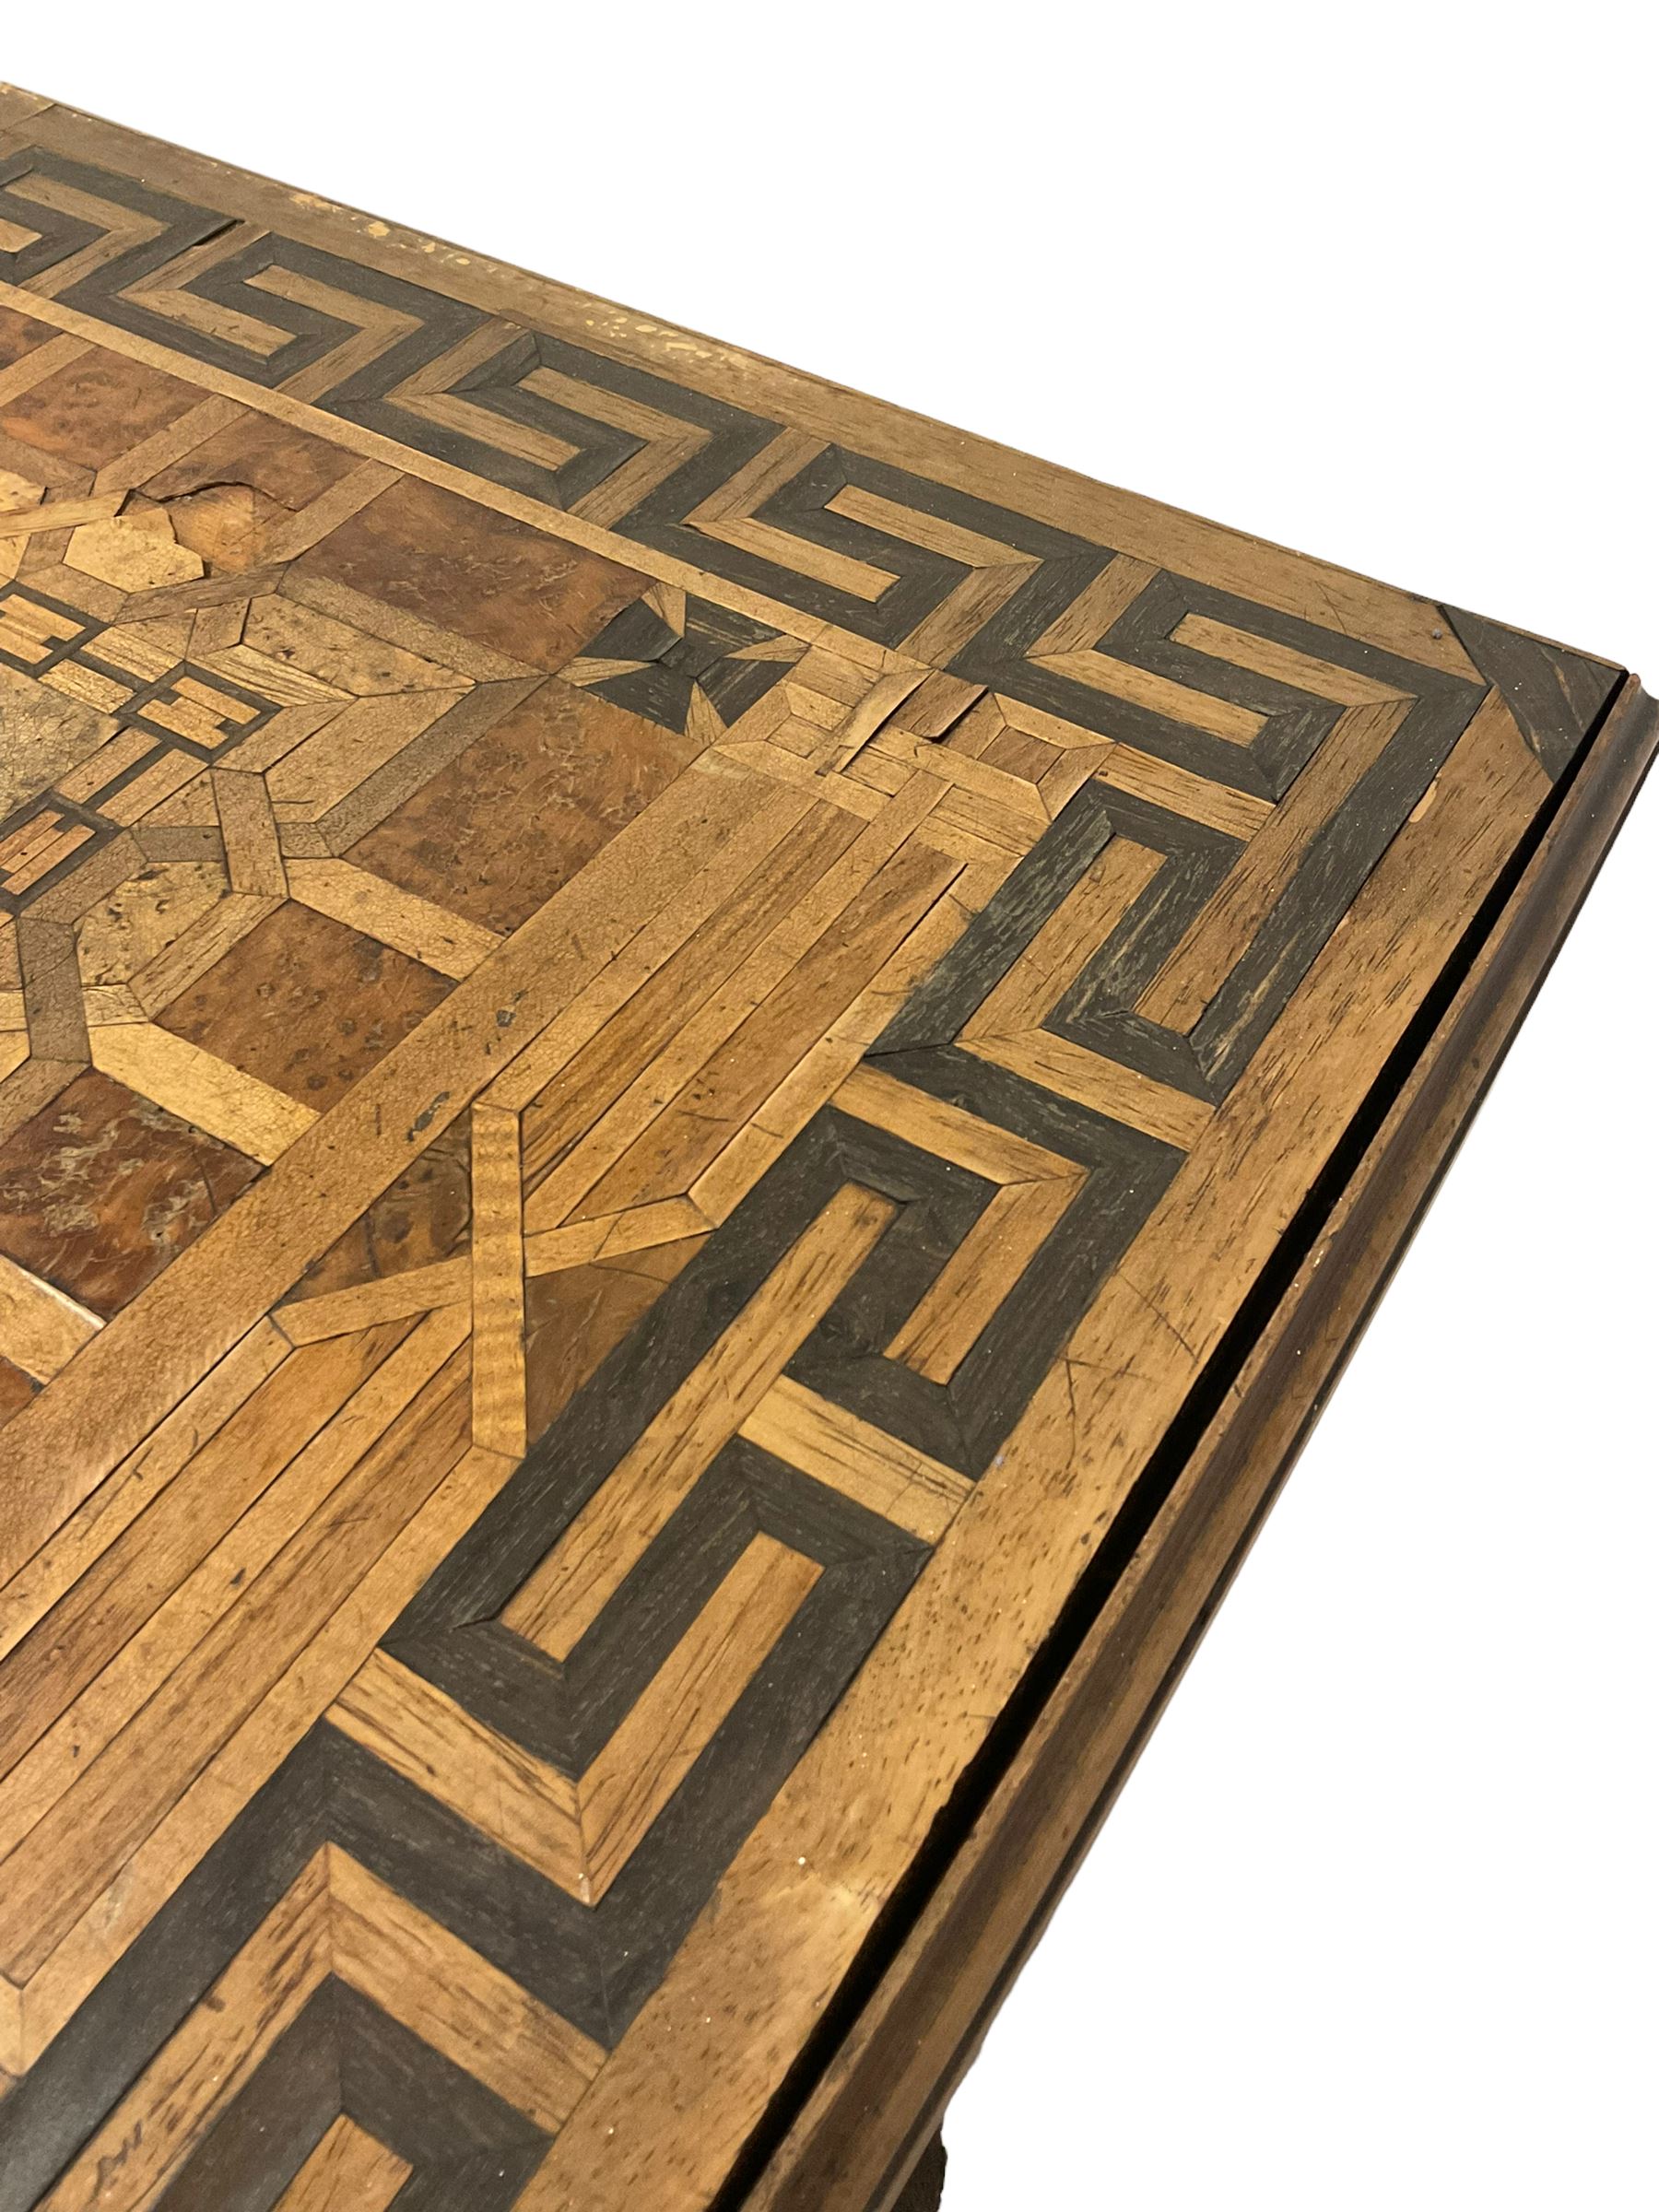 19th century parquetry wood specimen top table - Image 4 of 6